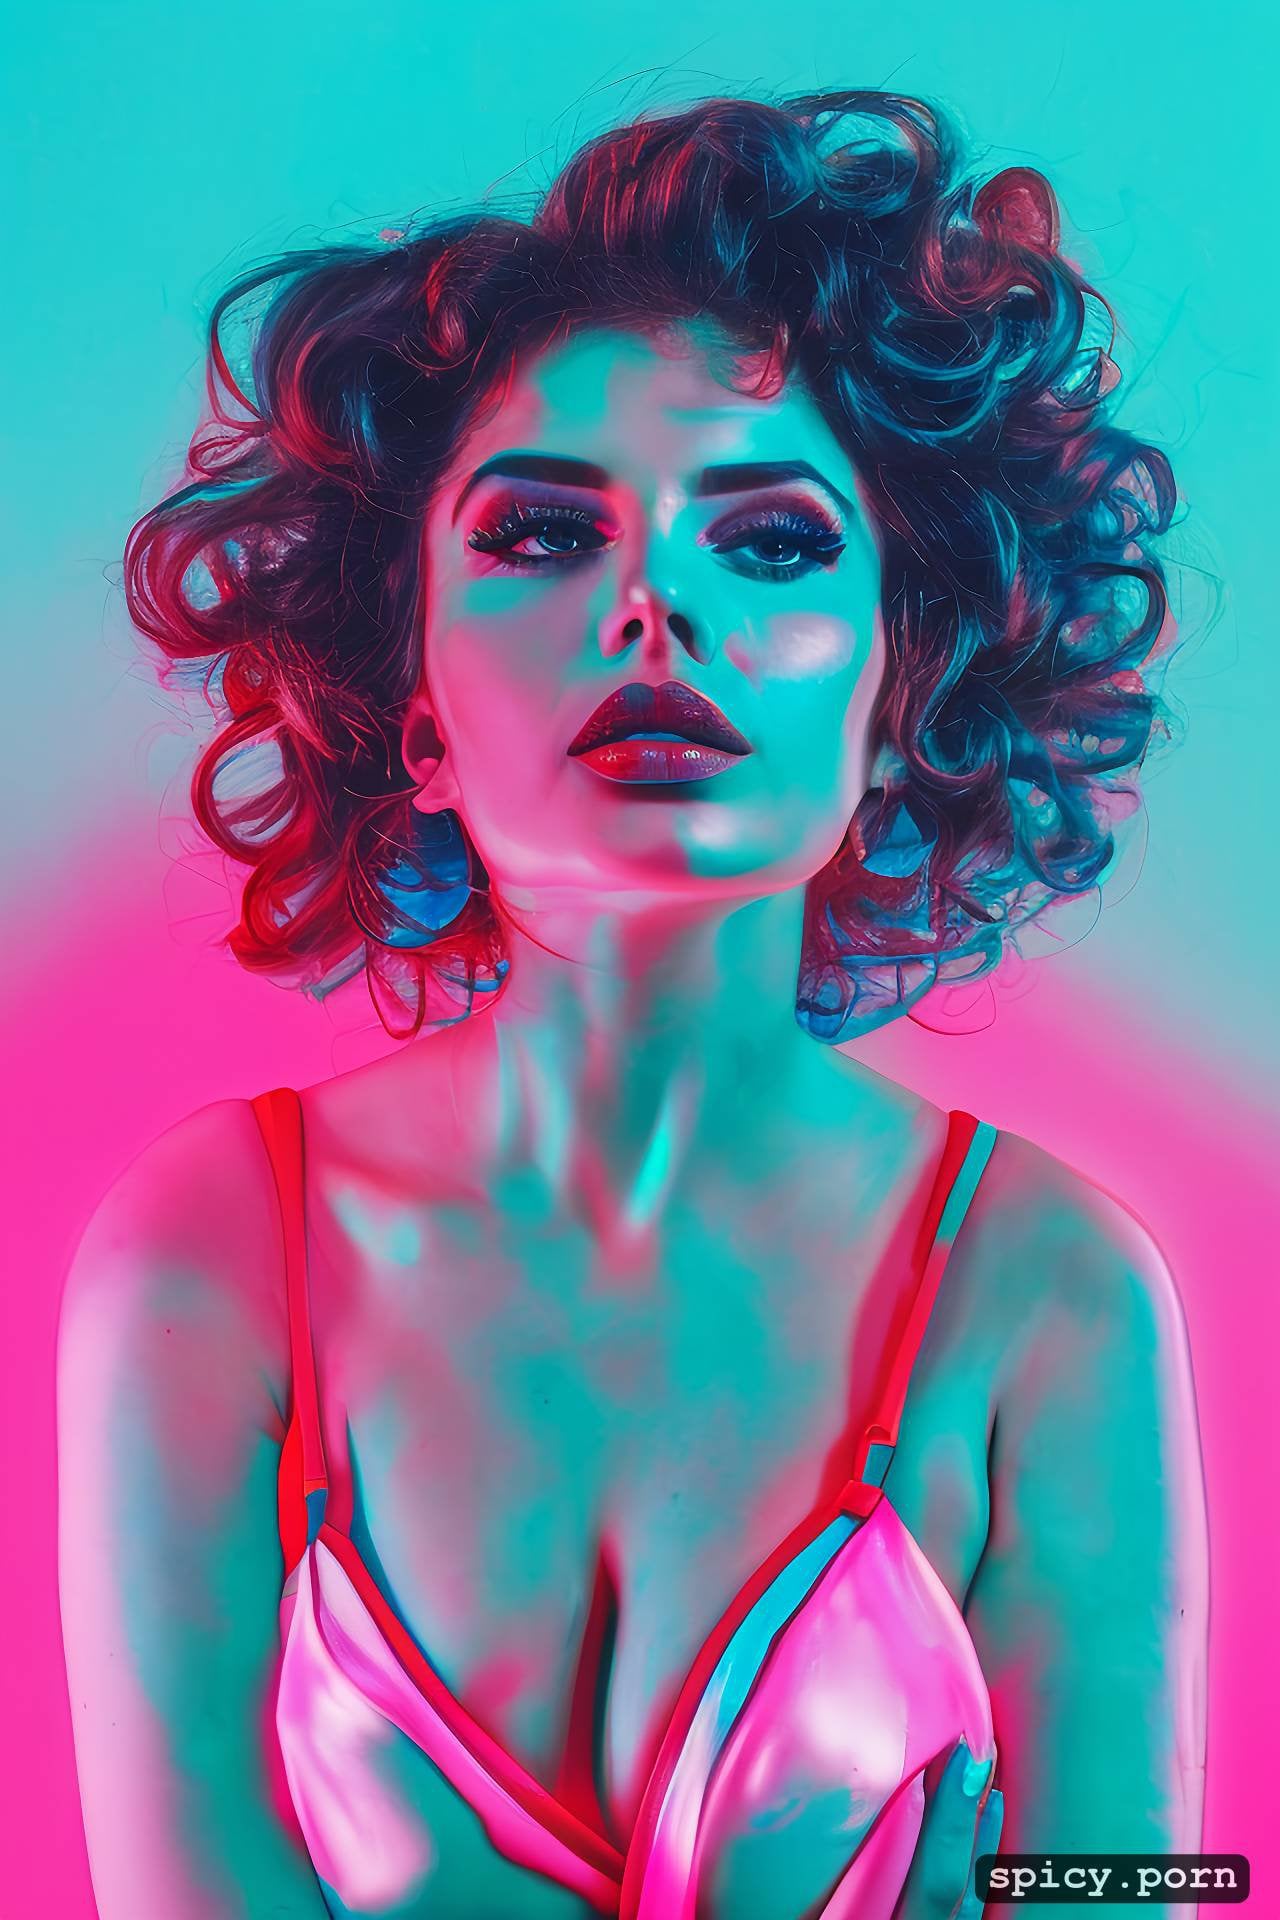 retrowave neon – created at spicy.porn